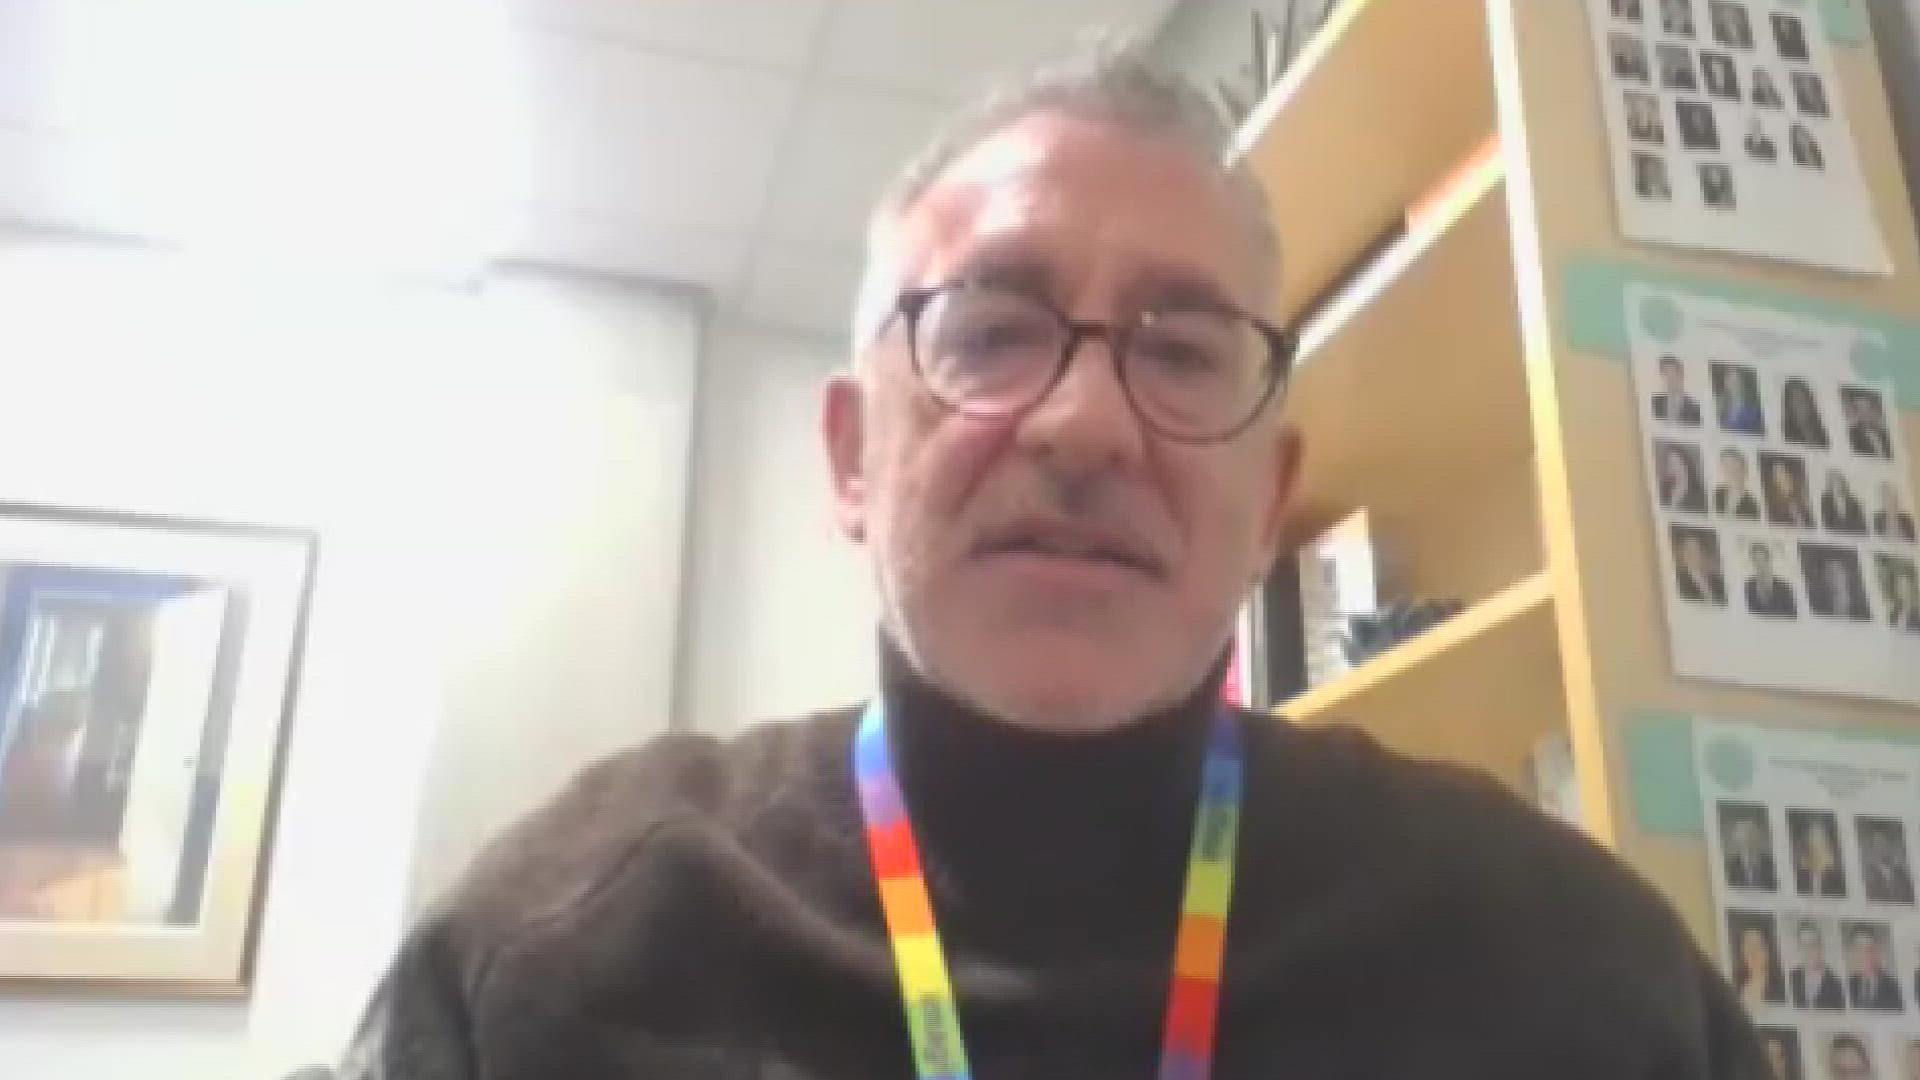 Dr. Robert Davies encourages people in the LGBTQ+ community to reach out to each other, and straight allies to check on their LGBTQ+ friends.